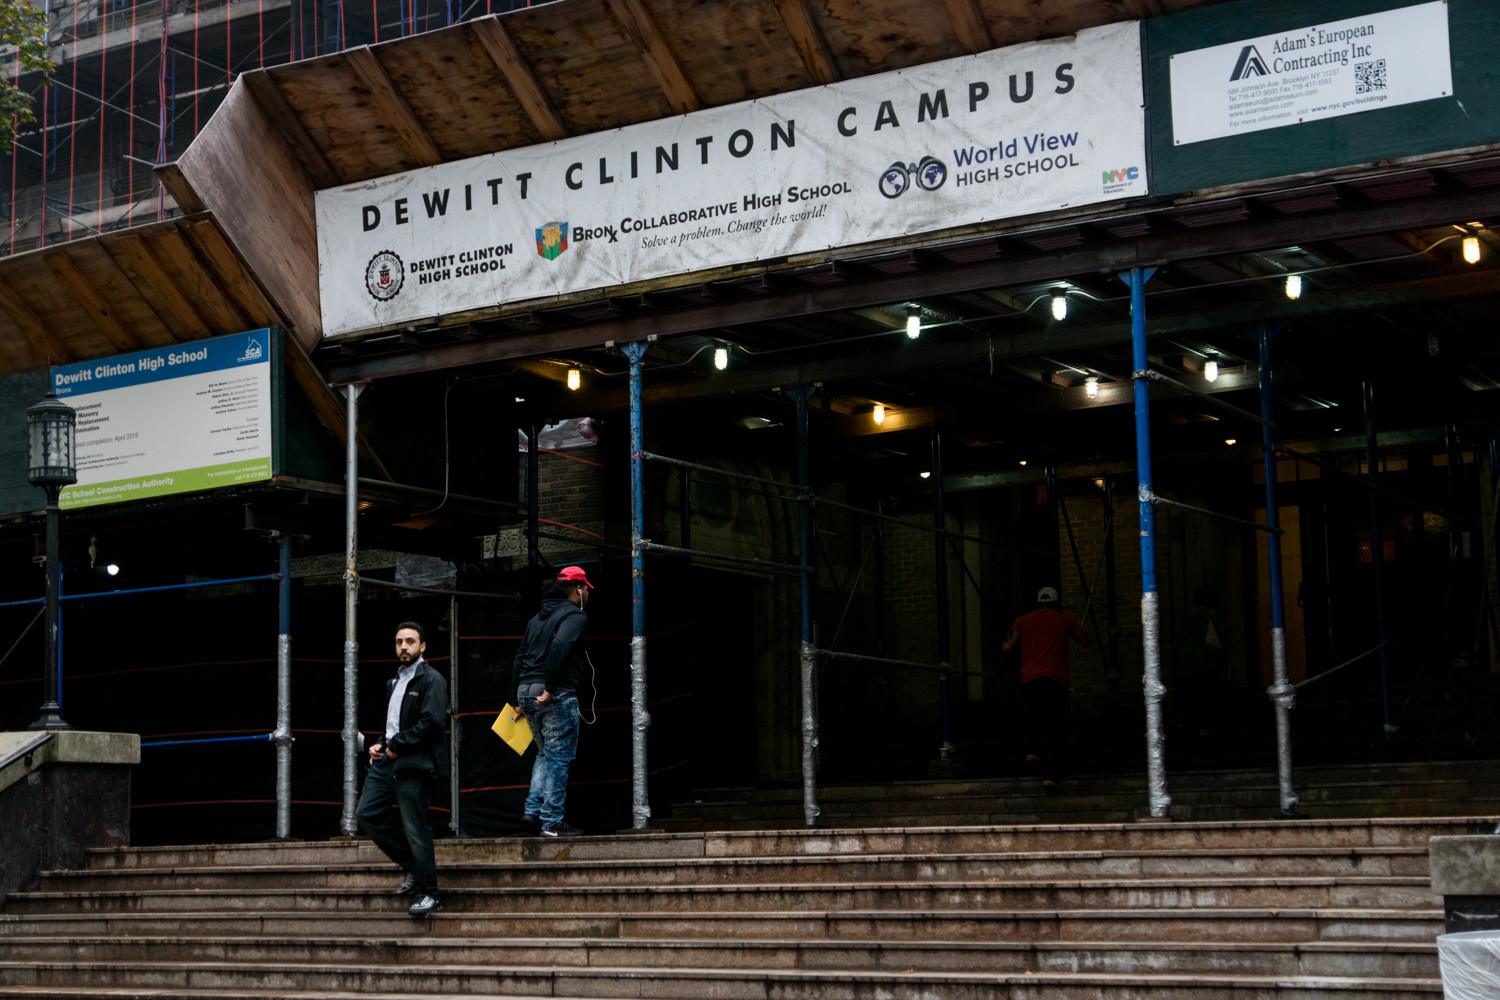 The state’s education department recently announced DeWitt Clinton High School would remain under the control of the city’s education department saying the school made improvements as it worked to reverse its low four-year graduation rate.